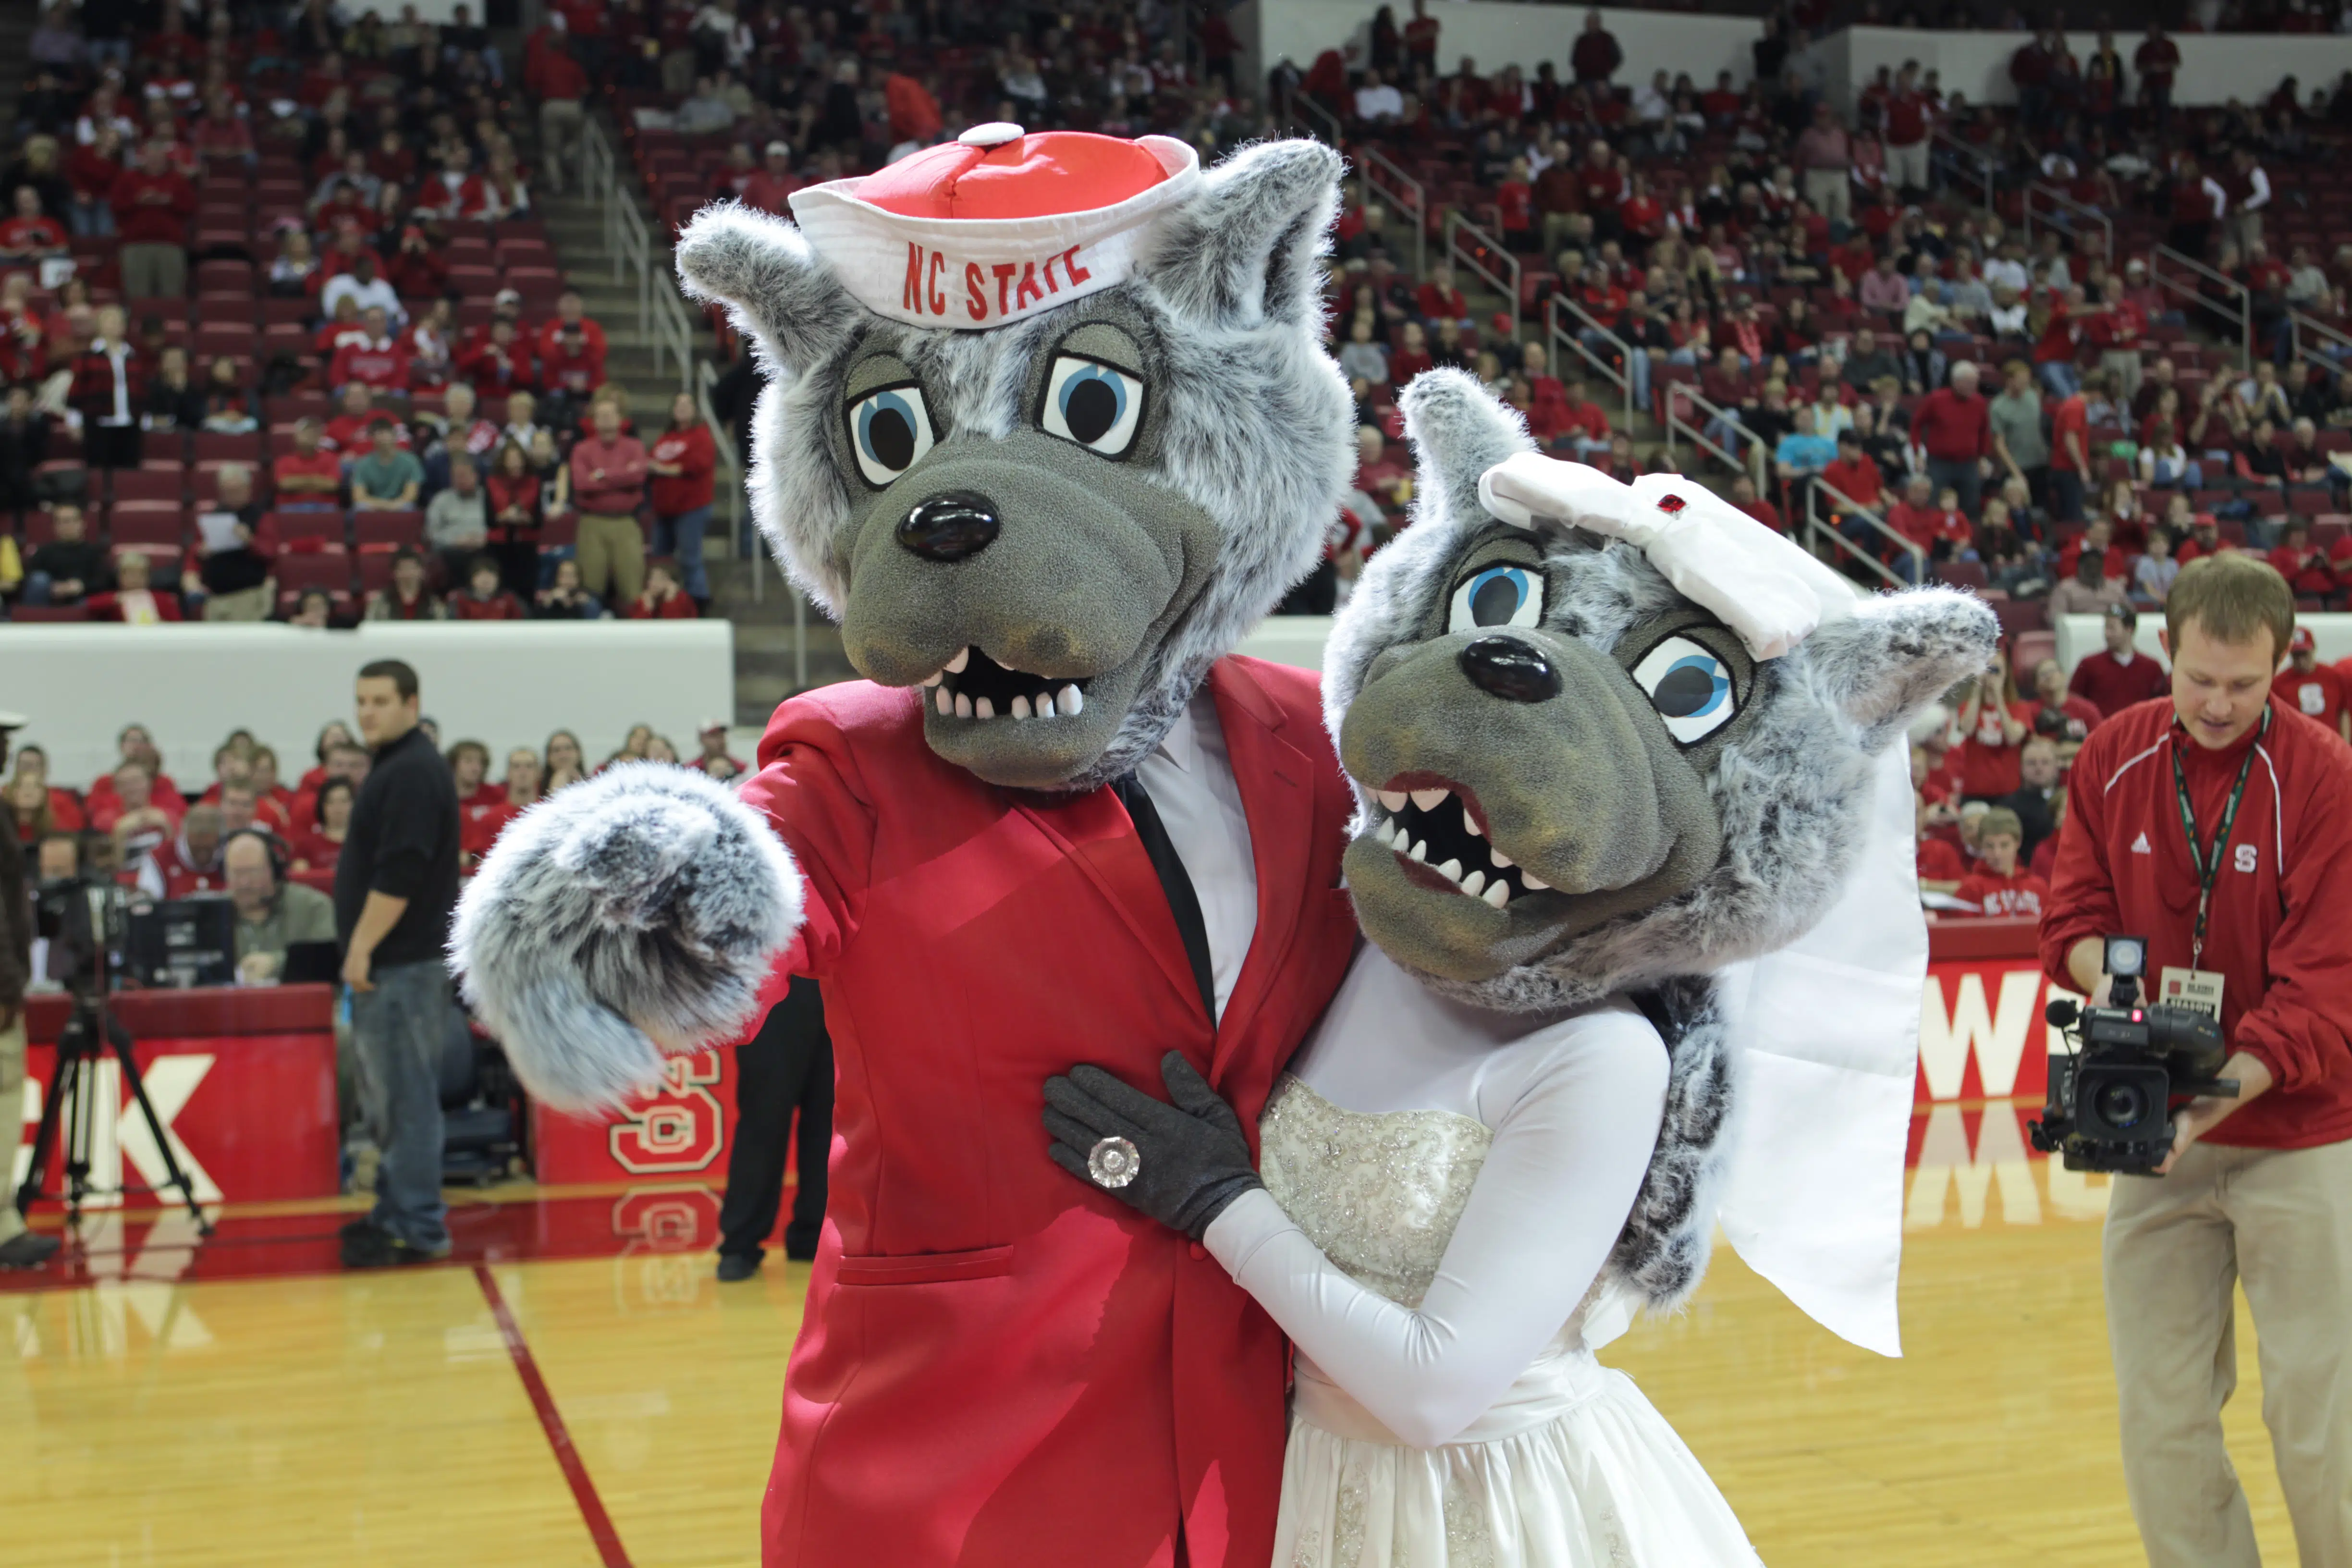 Mr. and Ms. Wuf pose together after their 2011 vow renewal ceremony, with Ms. Wuf showing off her new ring.